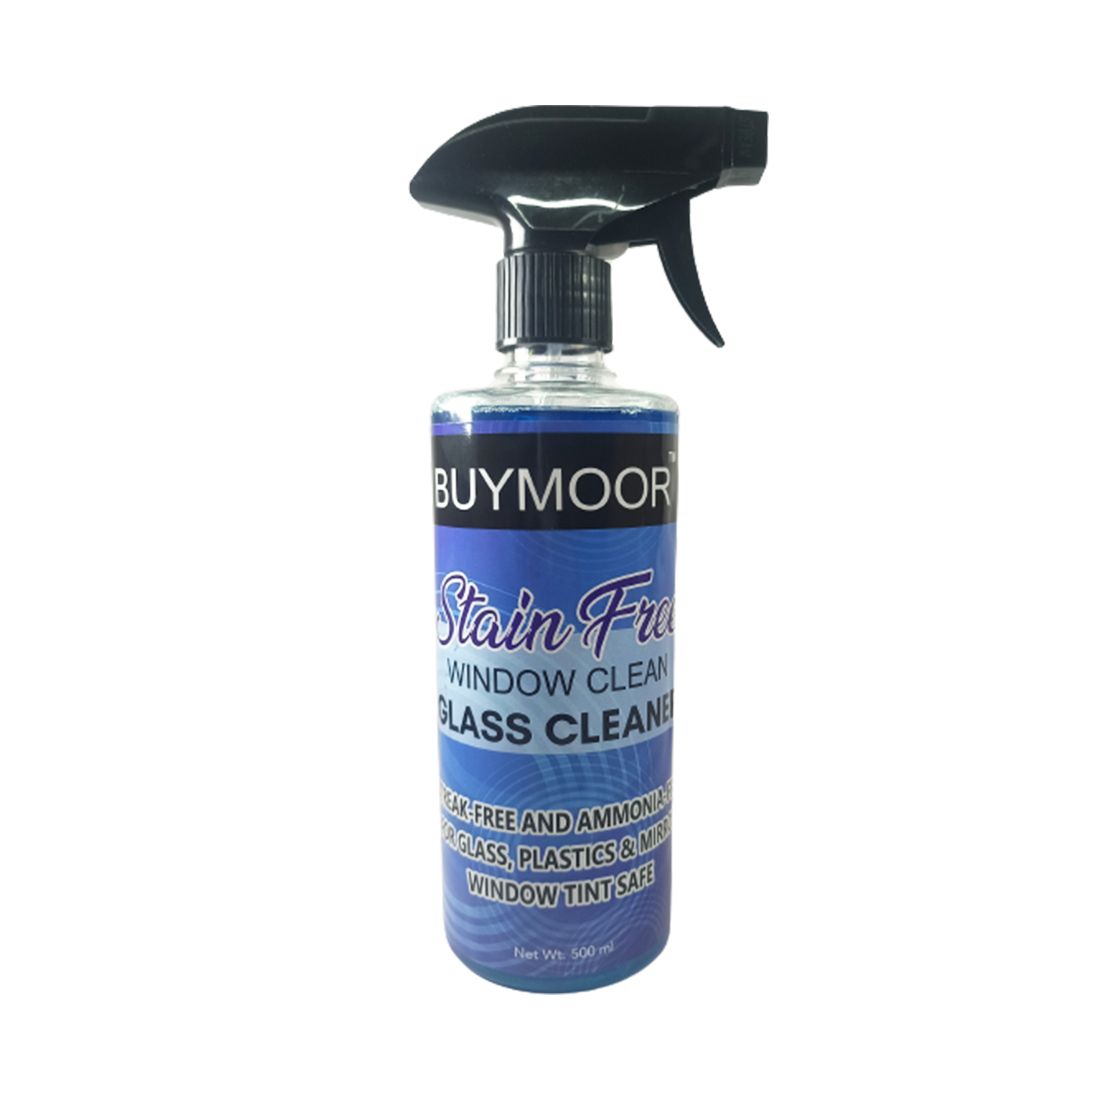 Buymoor Stain-Free Window Cleaner - Crystal Clear Glass Cleaning Solution - 500ml